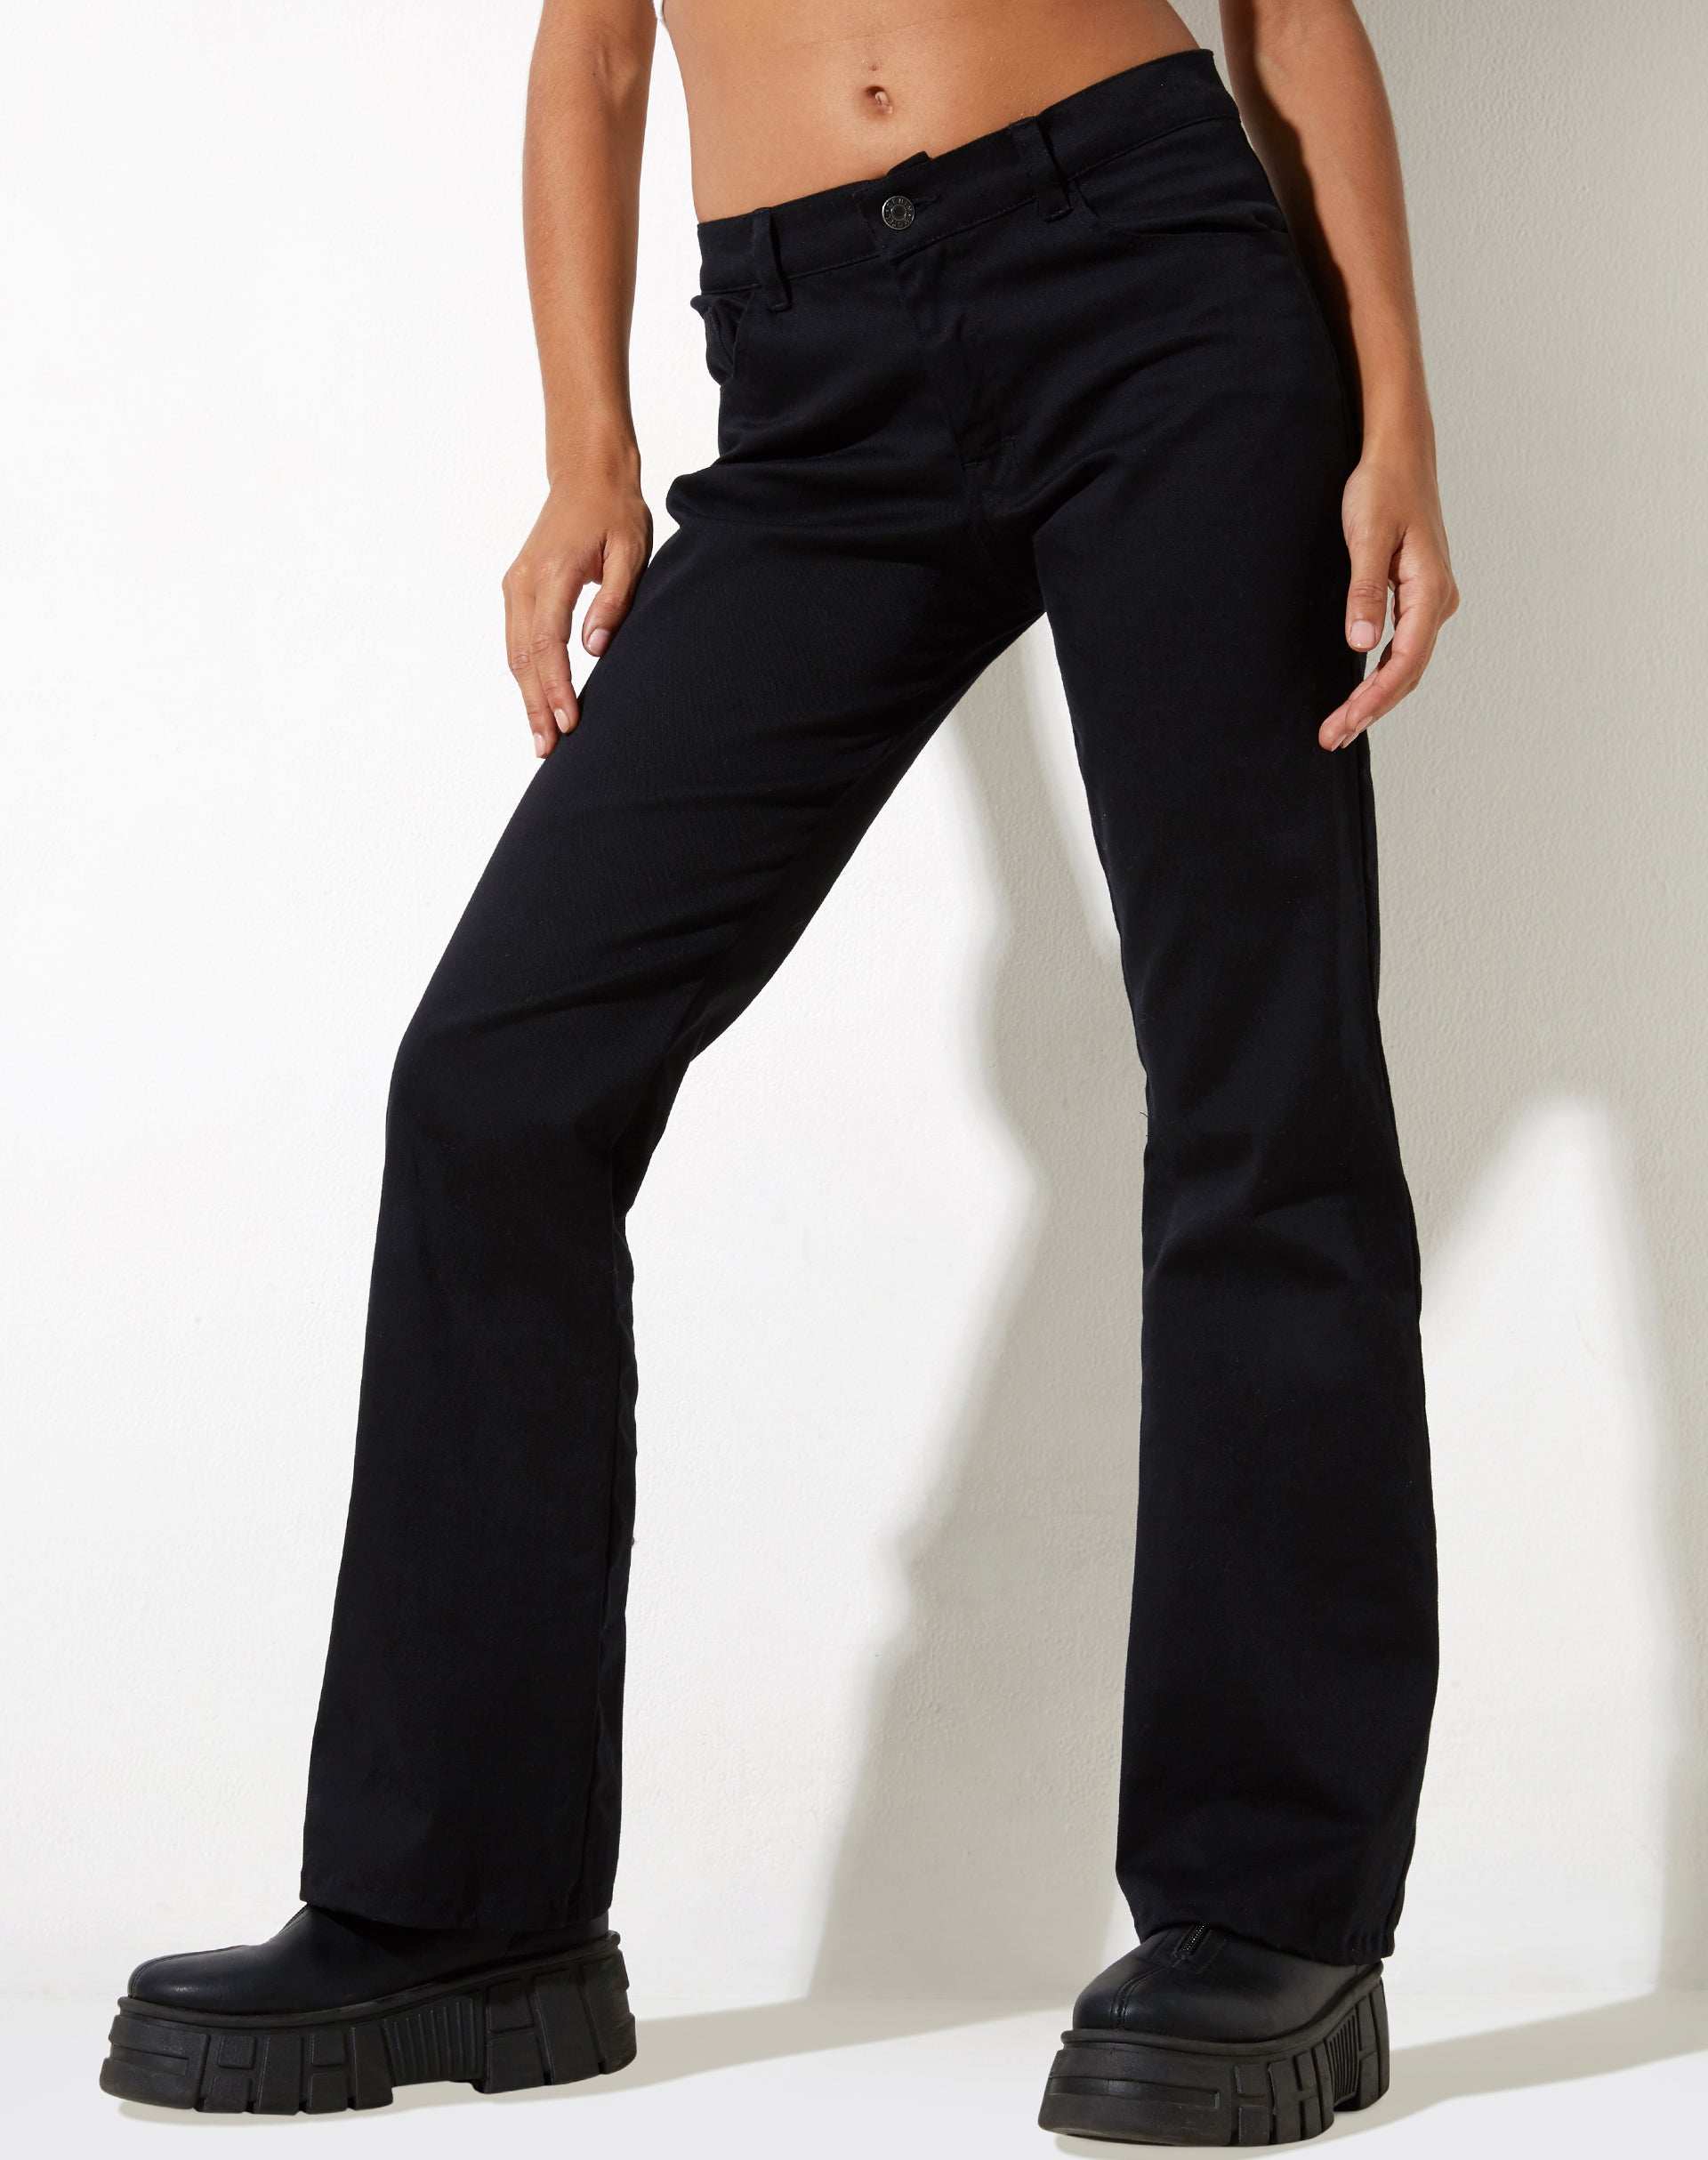 image of Jopan Flare Trouser in Twill Black